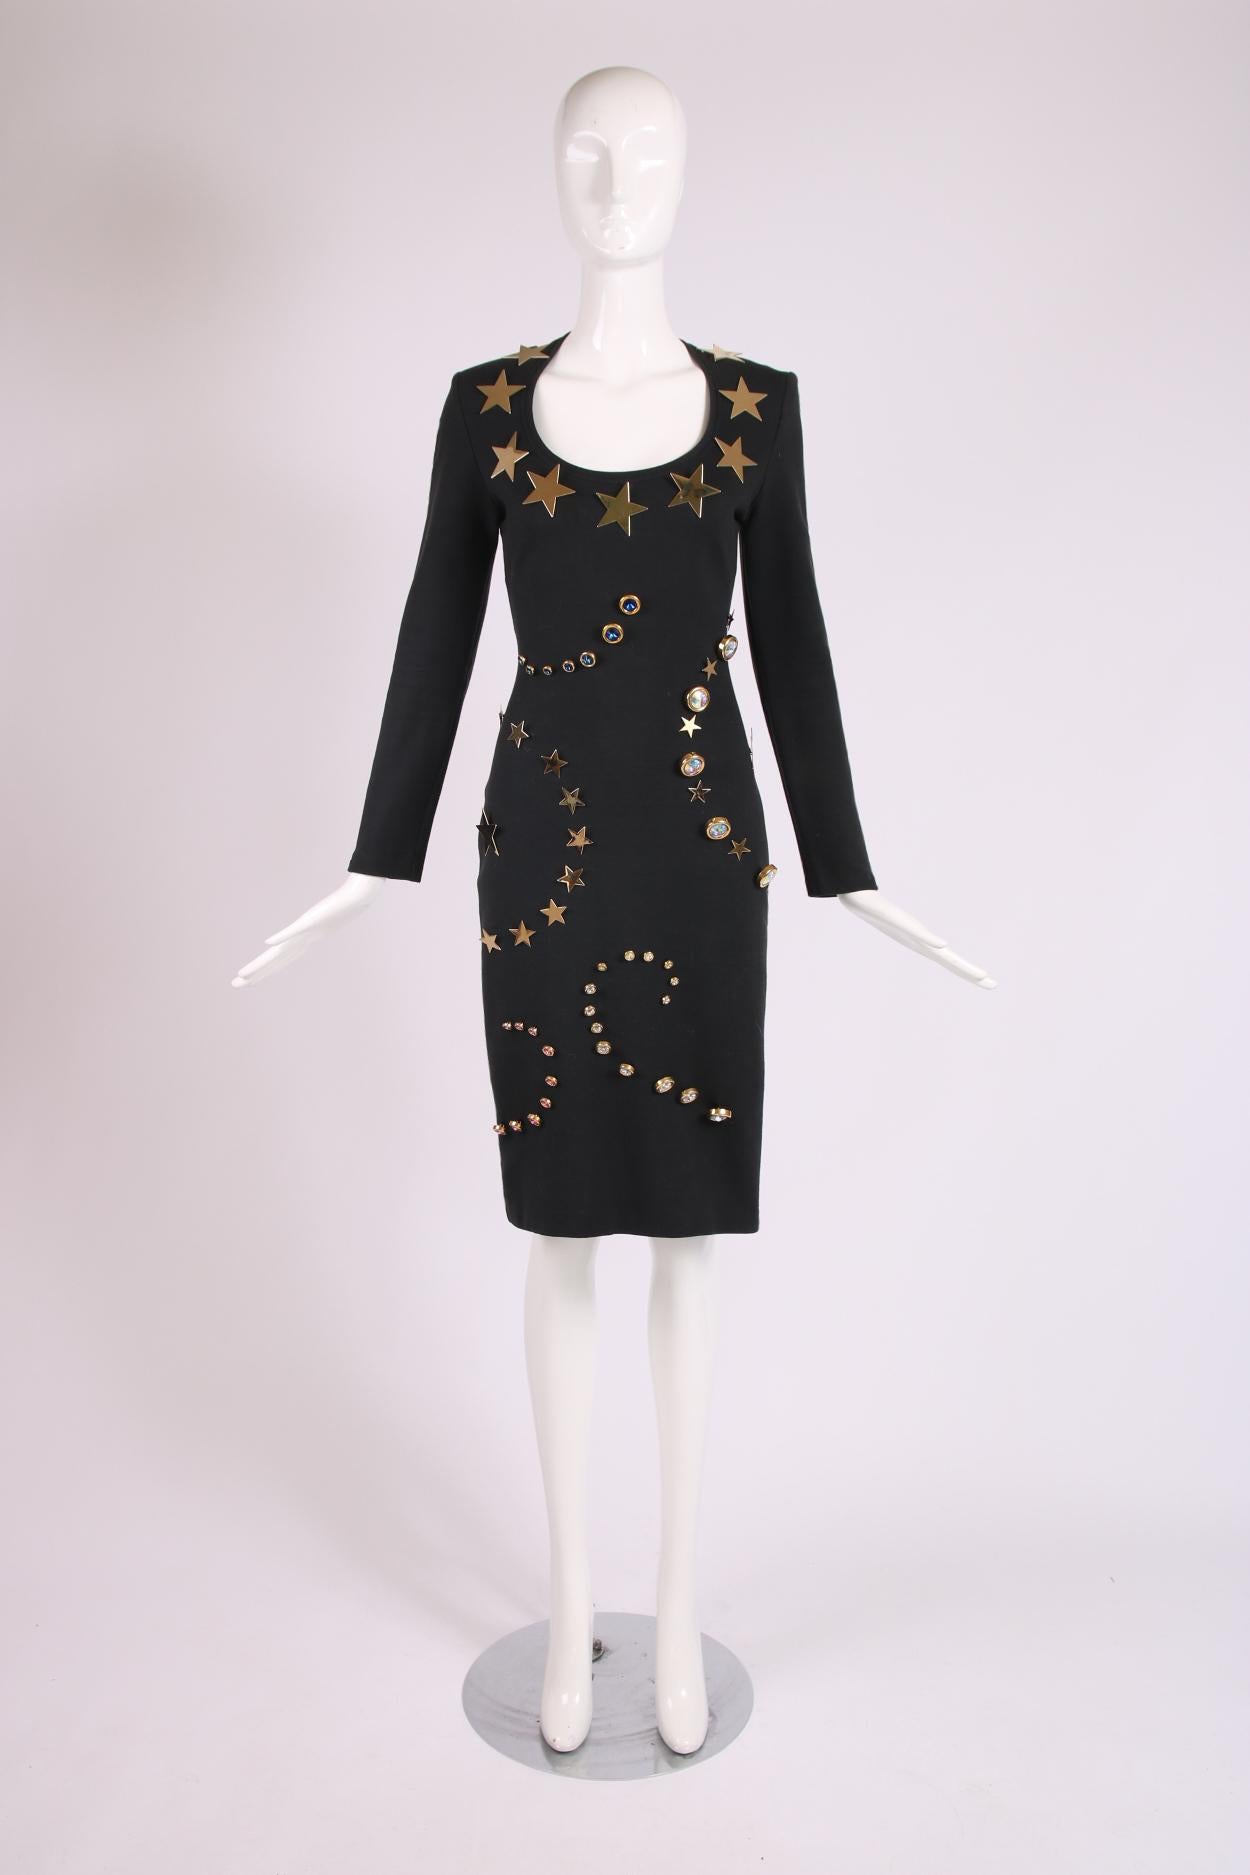 Patrick Kelly black scoop neck bodycon dress w/metal stars and oversized bezel-set rhinestone embellishments. In excellent condition. Fabric is a cotton blend and size tag 6 - please consult measurements.

Shoulders - 16